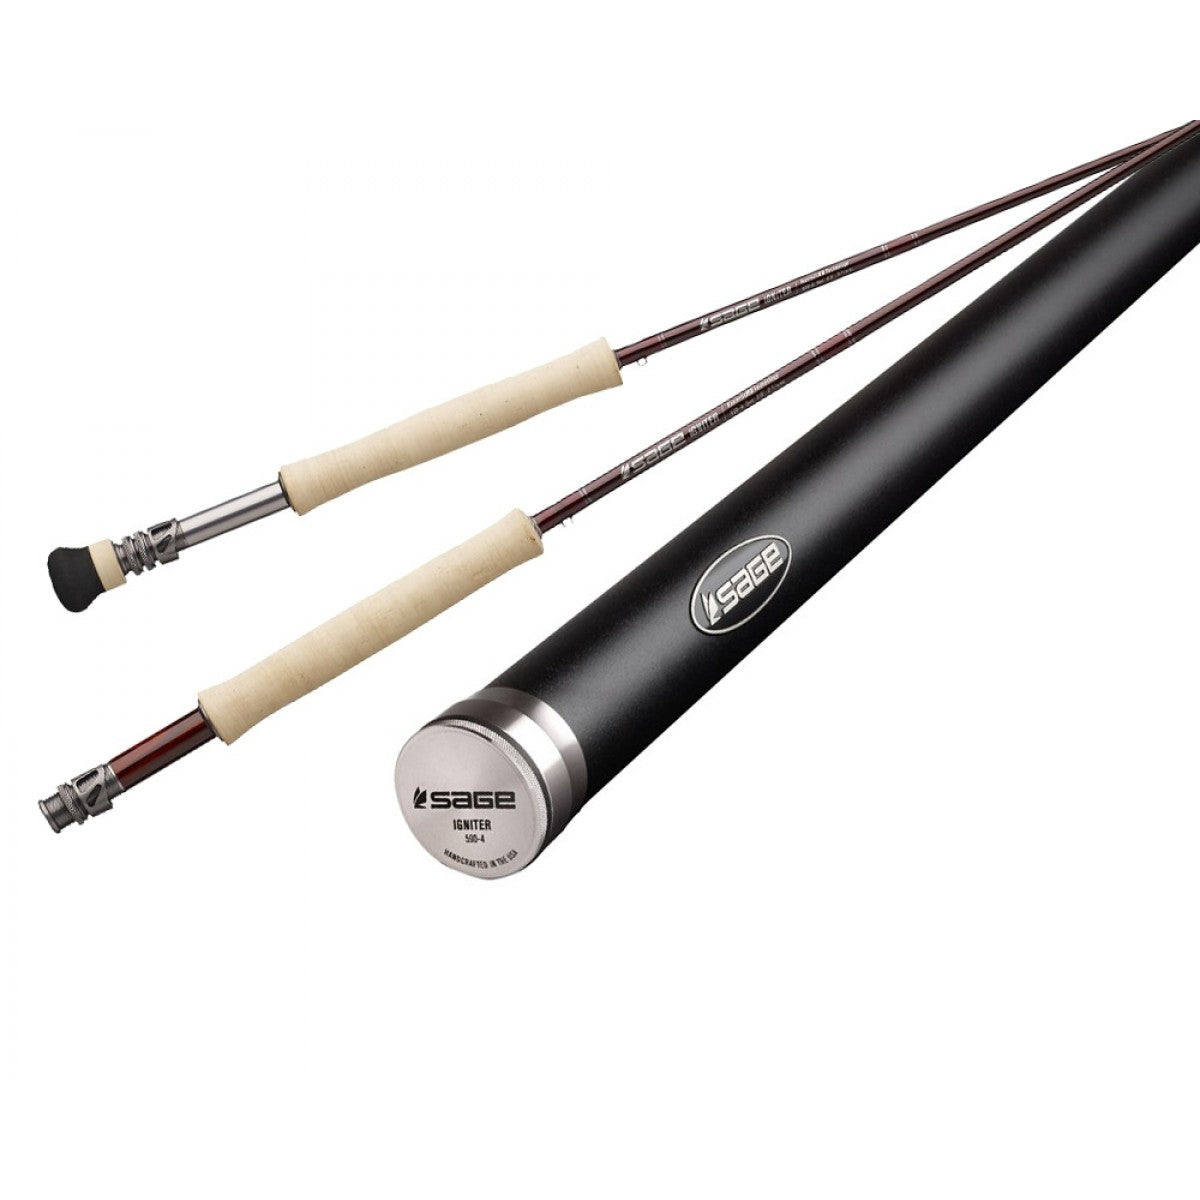 BT Burled Wood Sage Igniter 4Pc 9 Ft 6 In 5/6 Wt in Beartooth Sage Rods